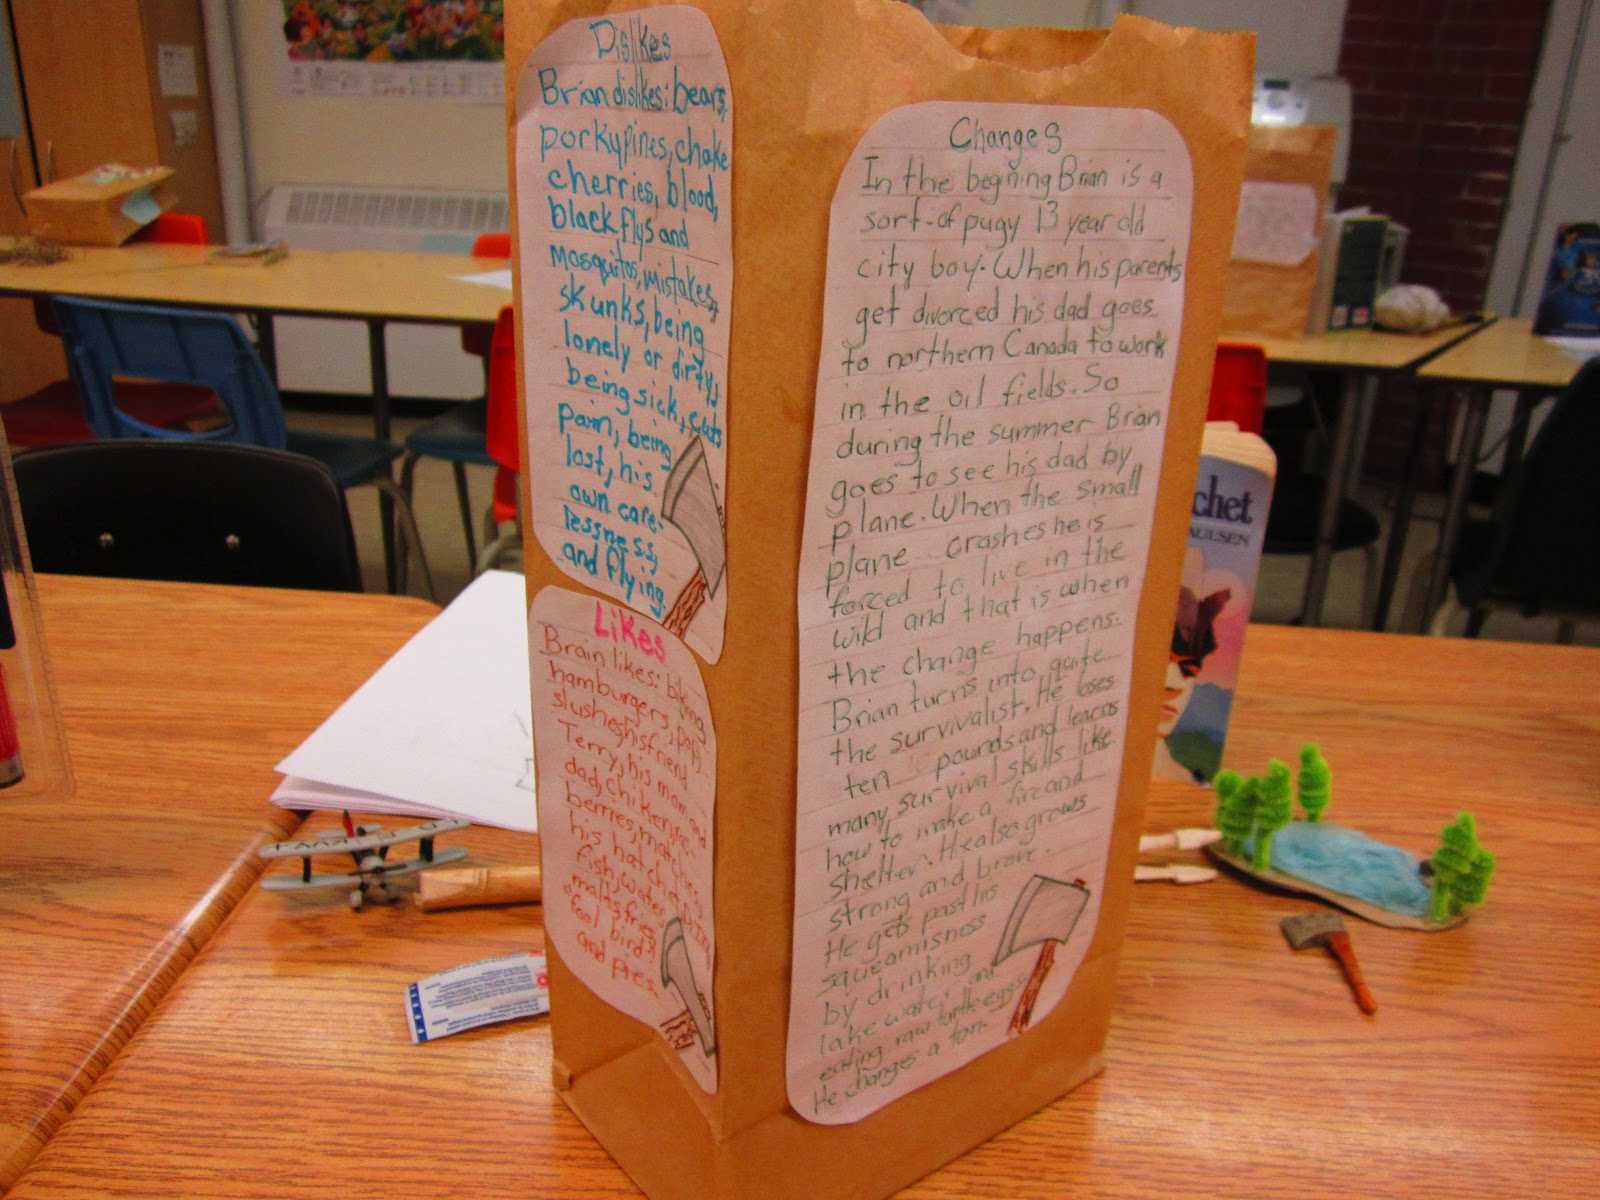 Paper Bag Characterization | Runde's Room Intended For Paper Bag Book Report Template